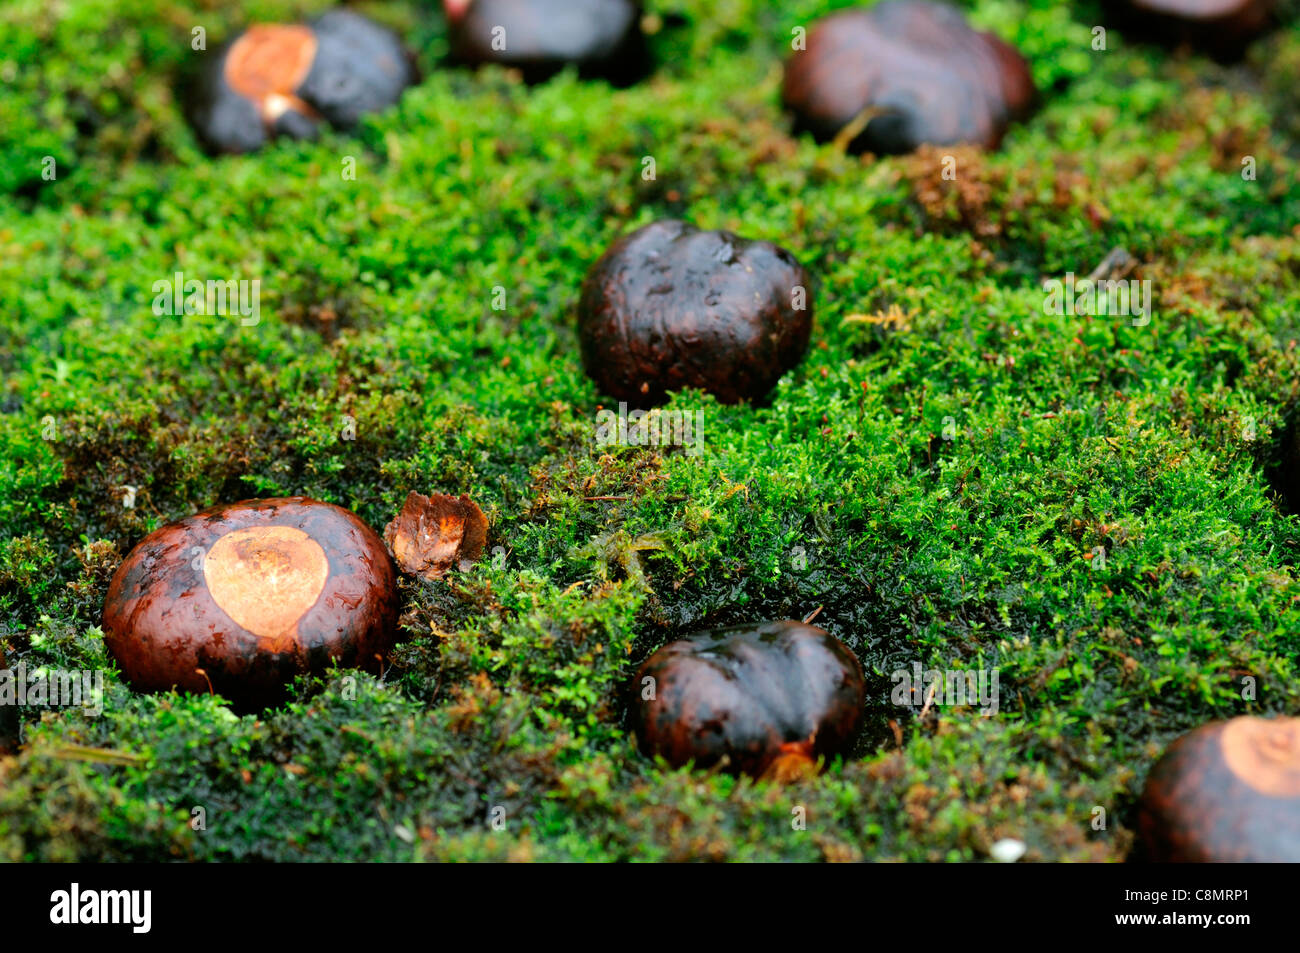 horse chestnuts closeup still life brown conkers fruit seeds green moss mossy embedded arranged arrange natural rustic materials Stock Photo